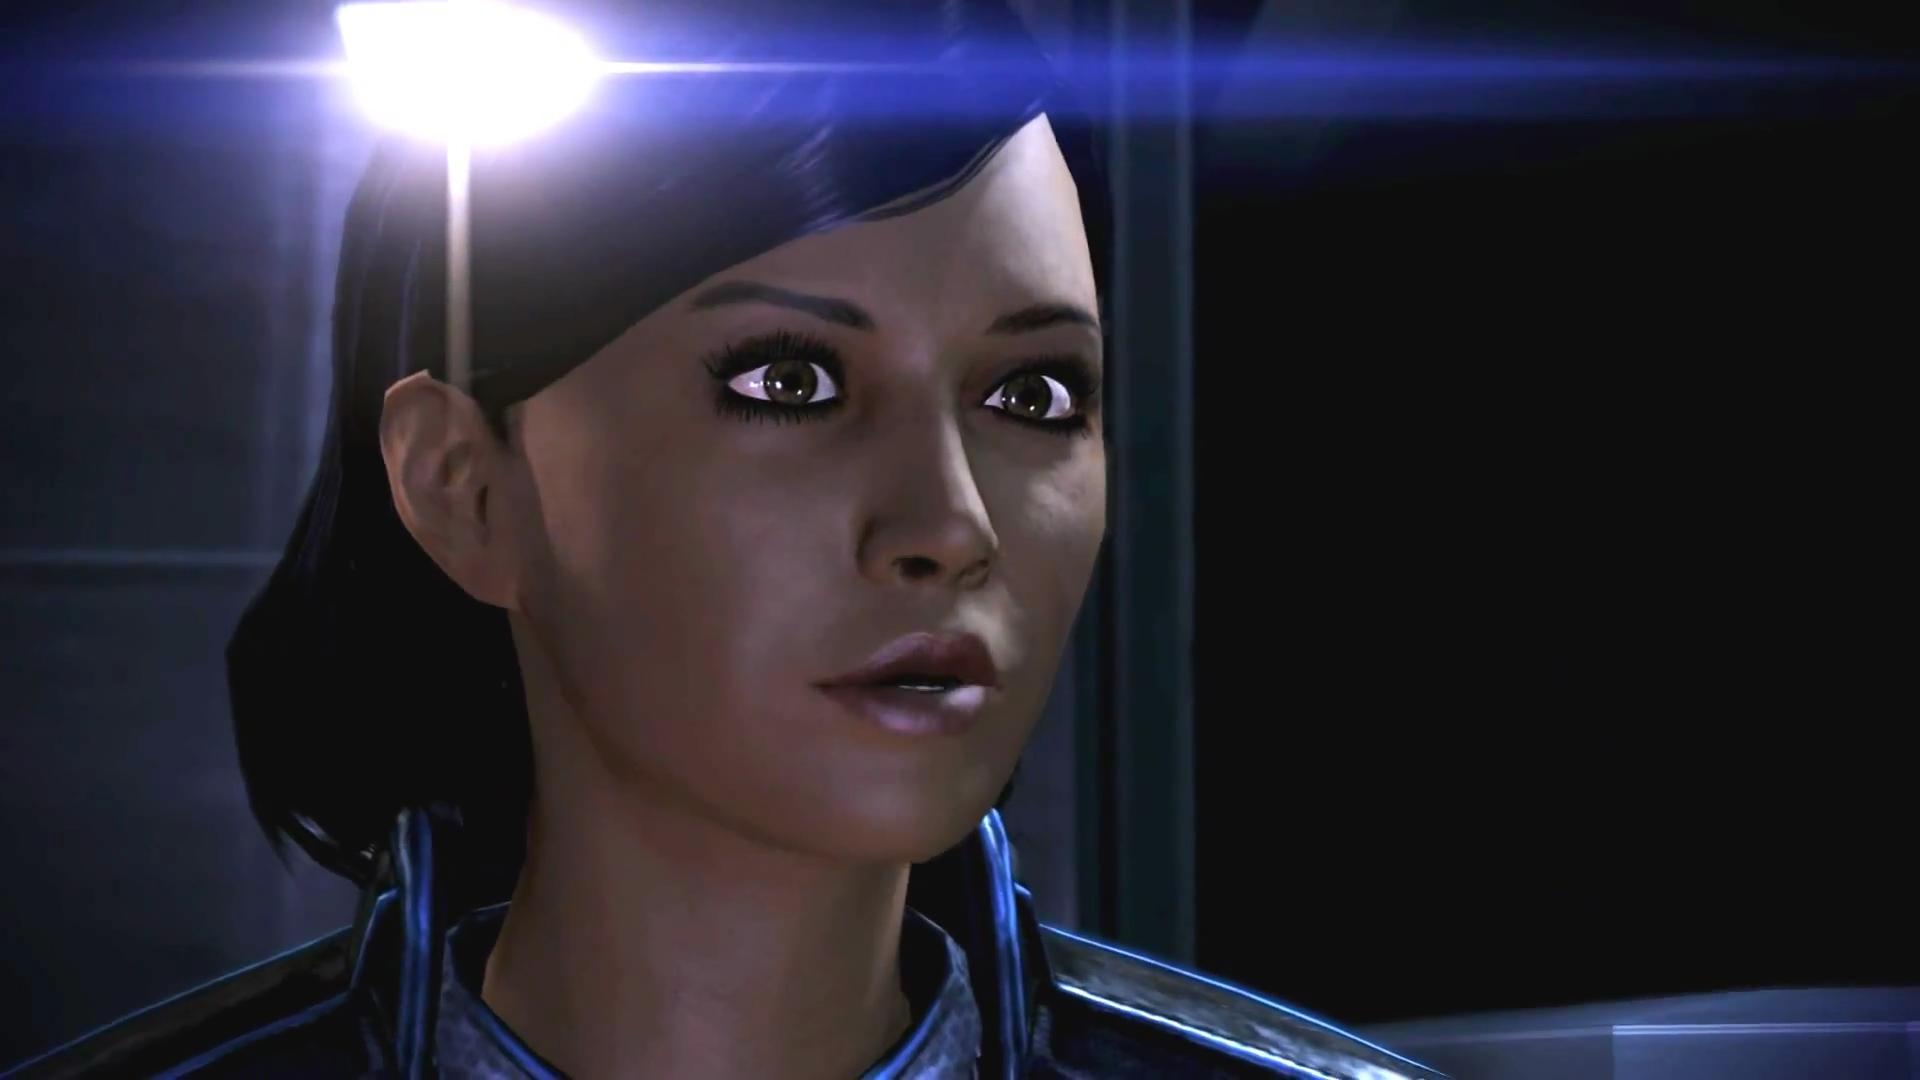 Mass Effect 3 Writers Didnt Want Same Sex Romance To Be “a Straight 